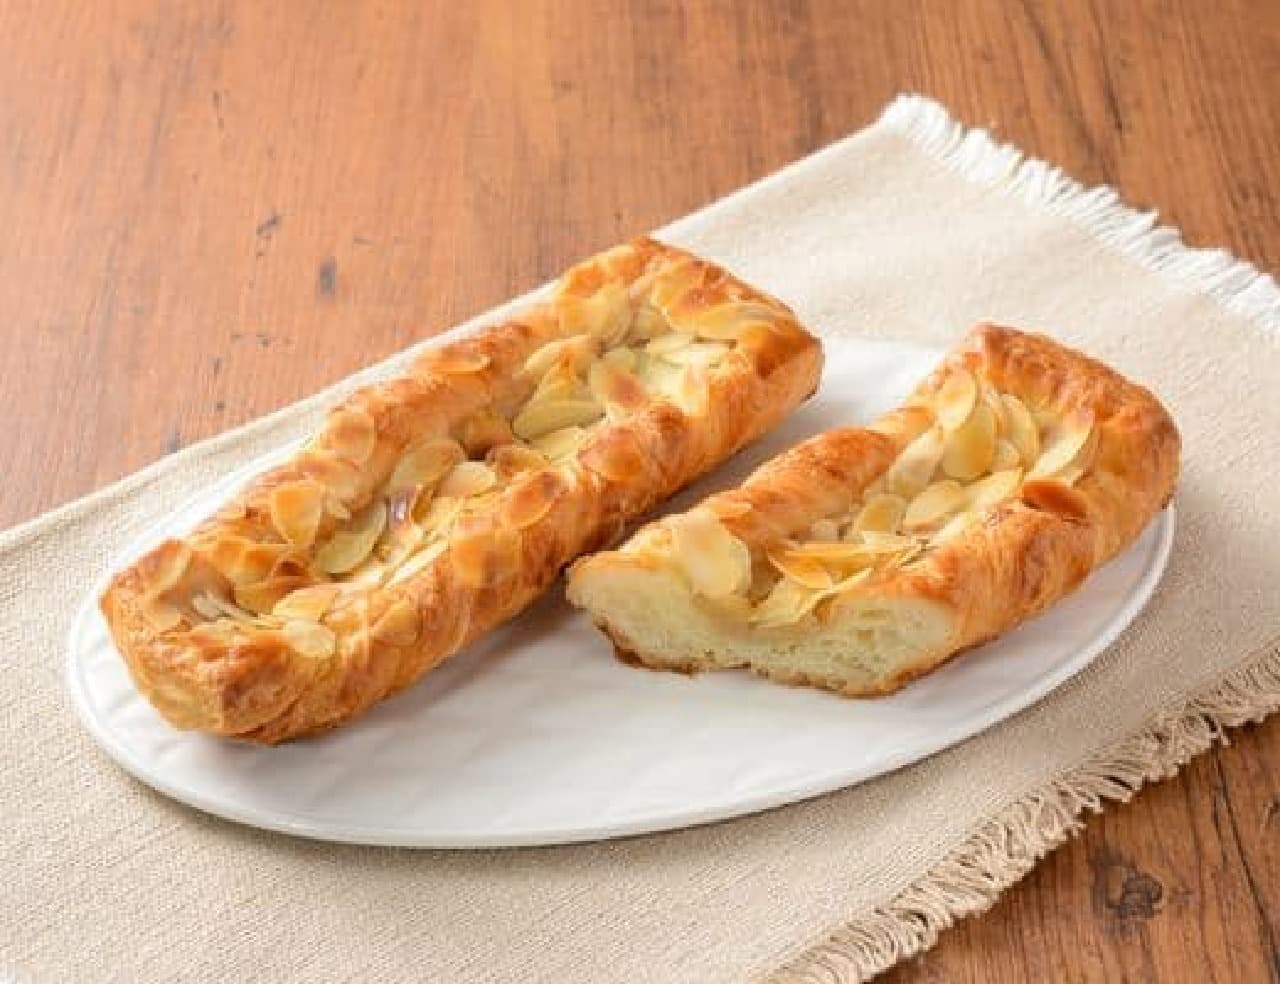 Lawson "Almond Danish with French Fermented Butter